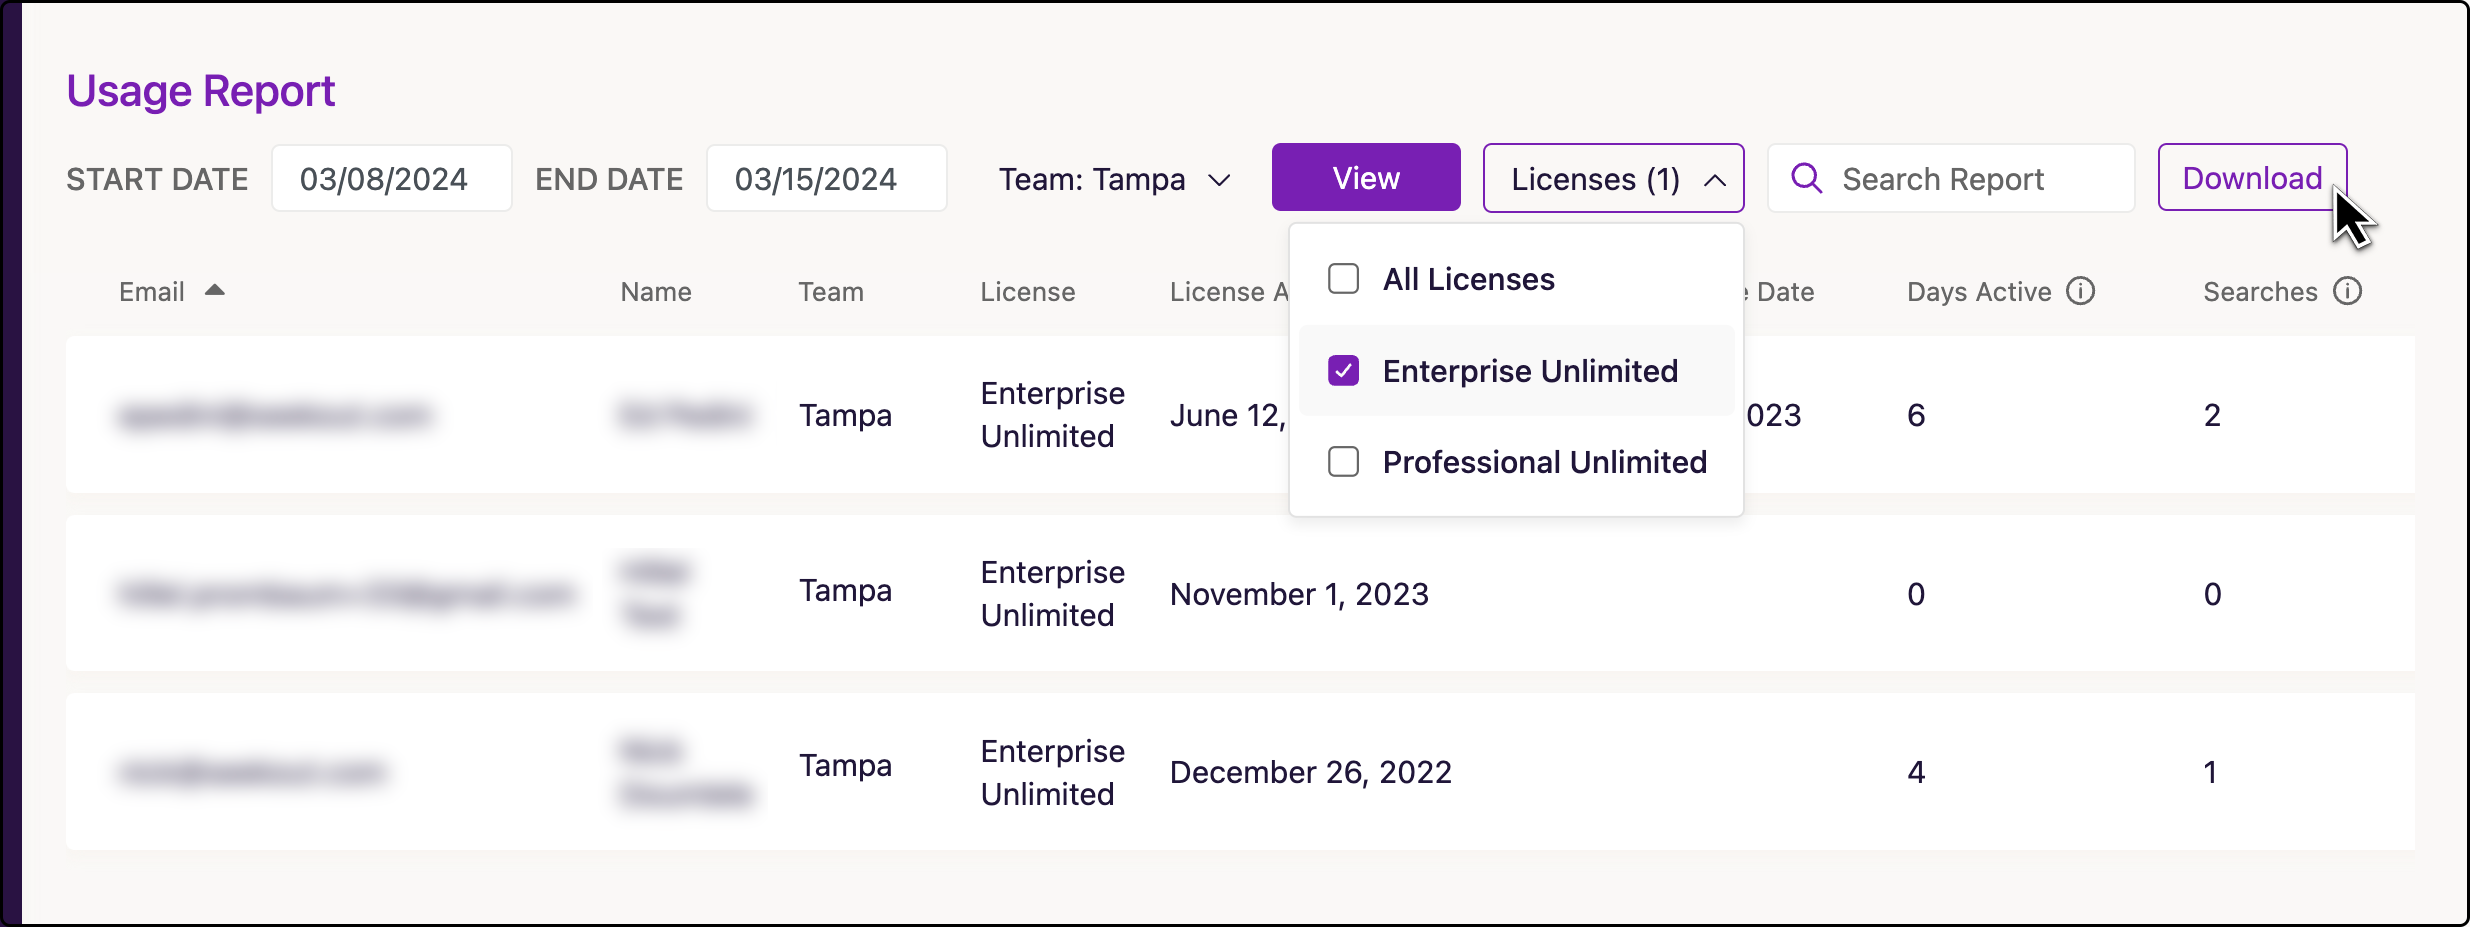 Before you download a Usage Report, you can use the License filter to only display and export users with specific licenses.